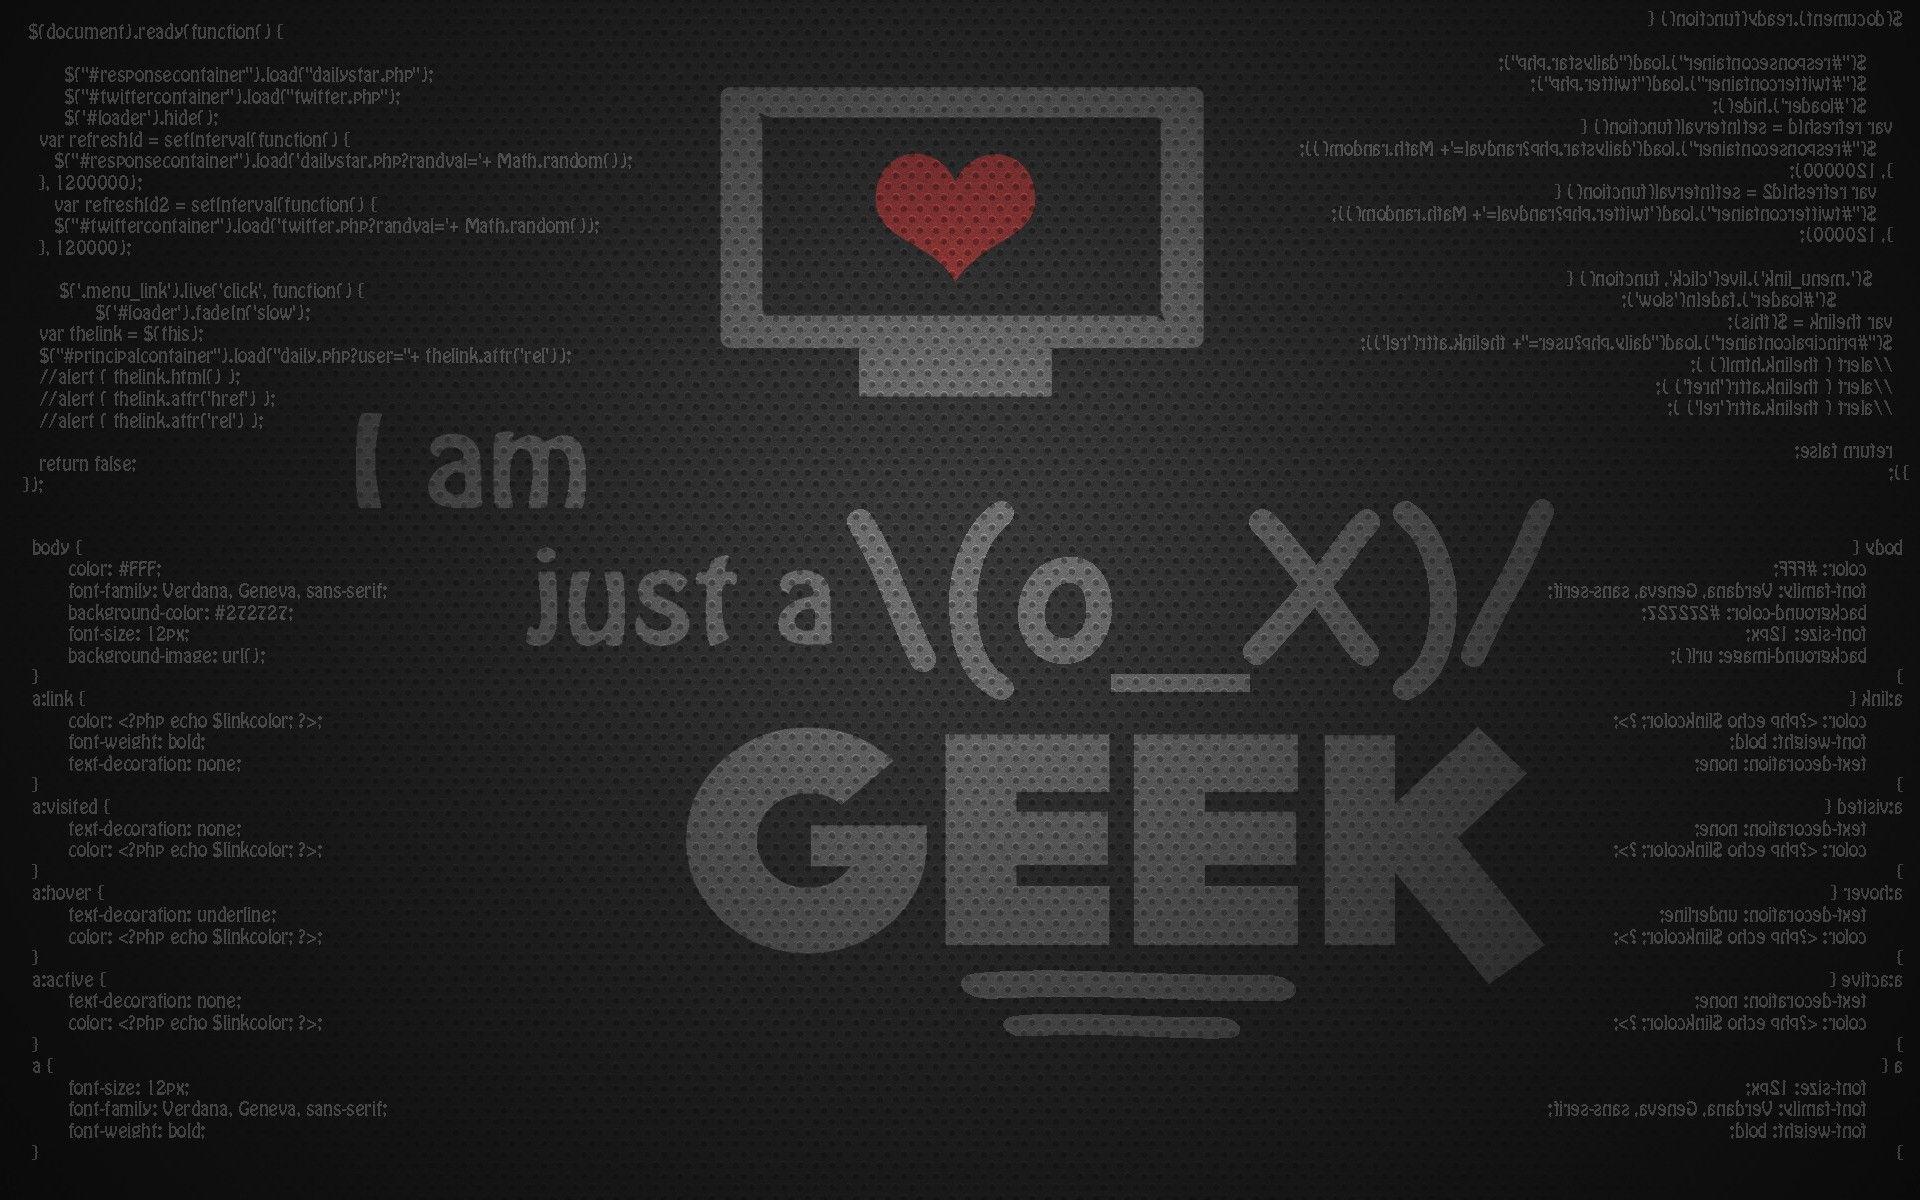 Programmer HD Wallpapers and Backgrounds